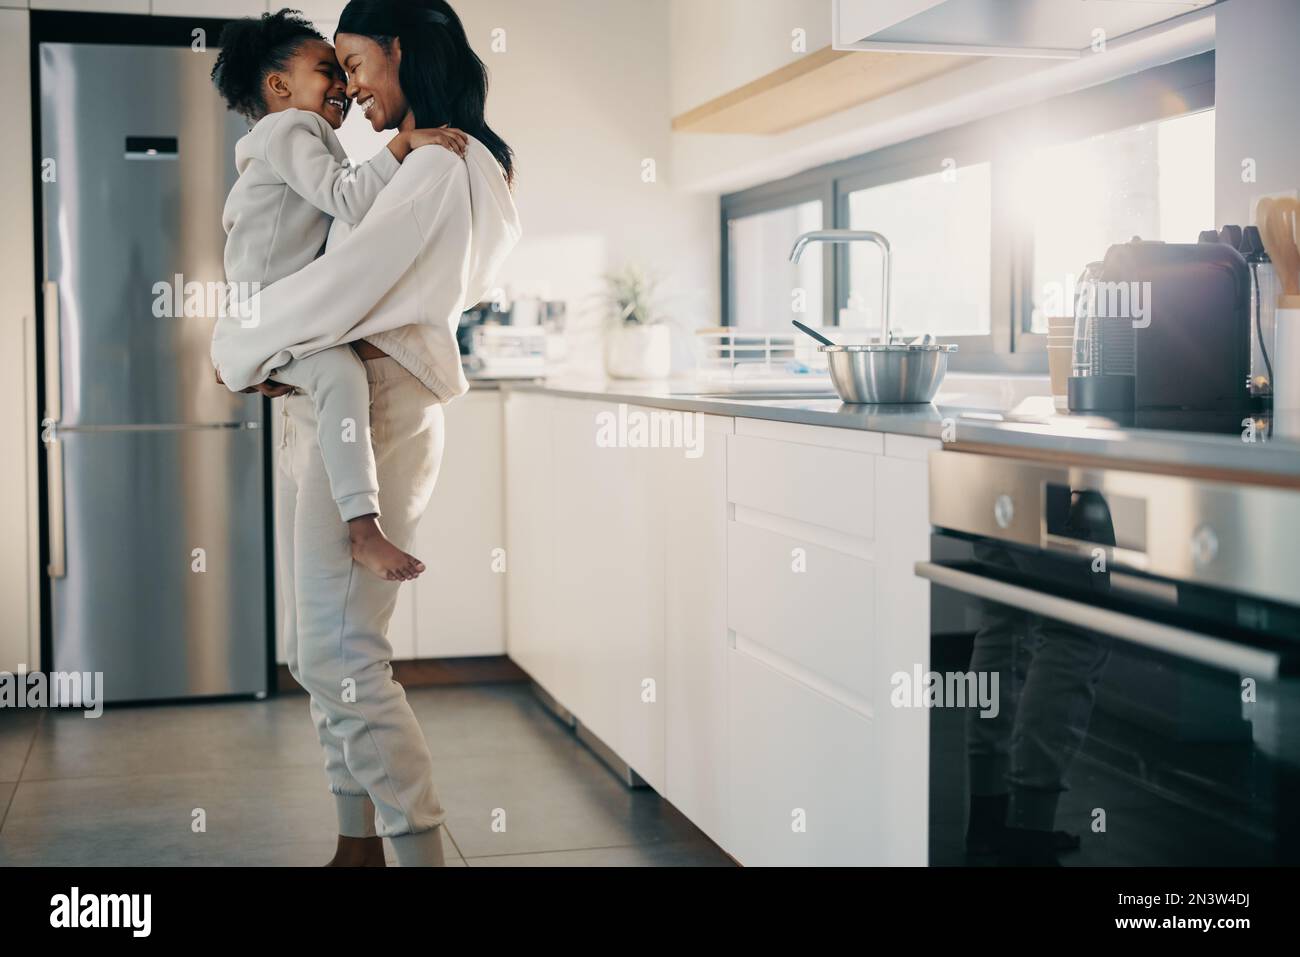 Single mother carrying her daughter in the kitchen. Happy black mom bonding with her kid. Mom and daughter are smiling and embracing each other. Stock Photo